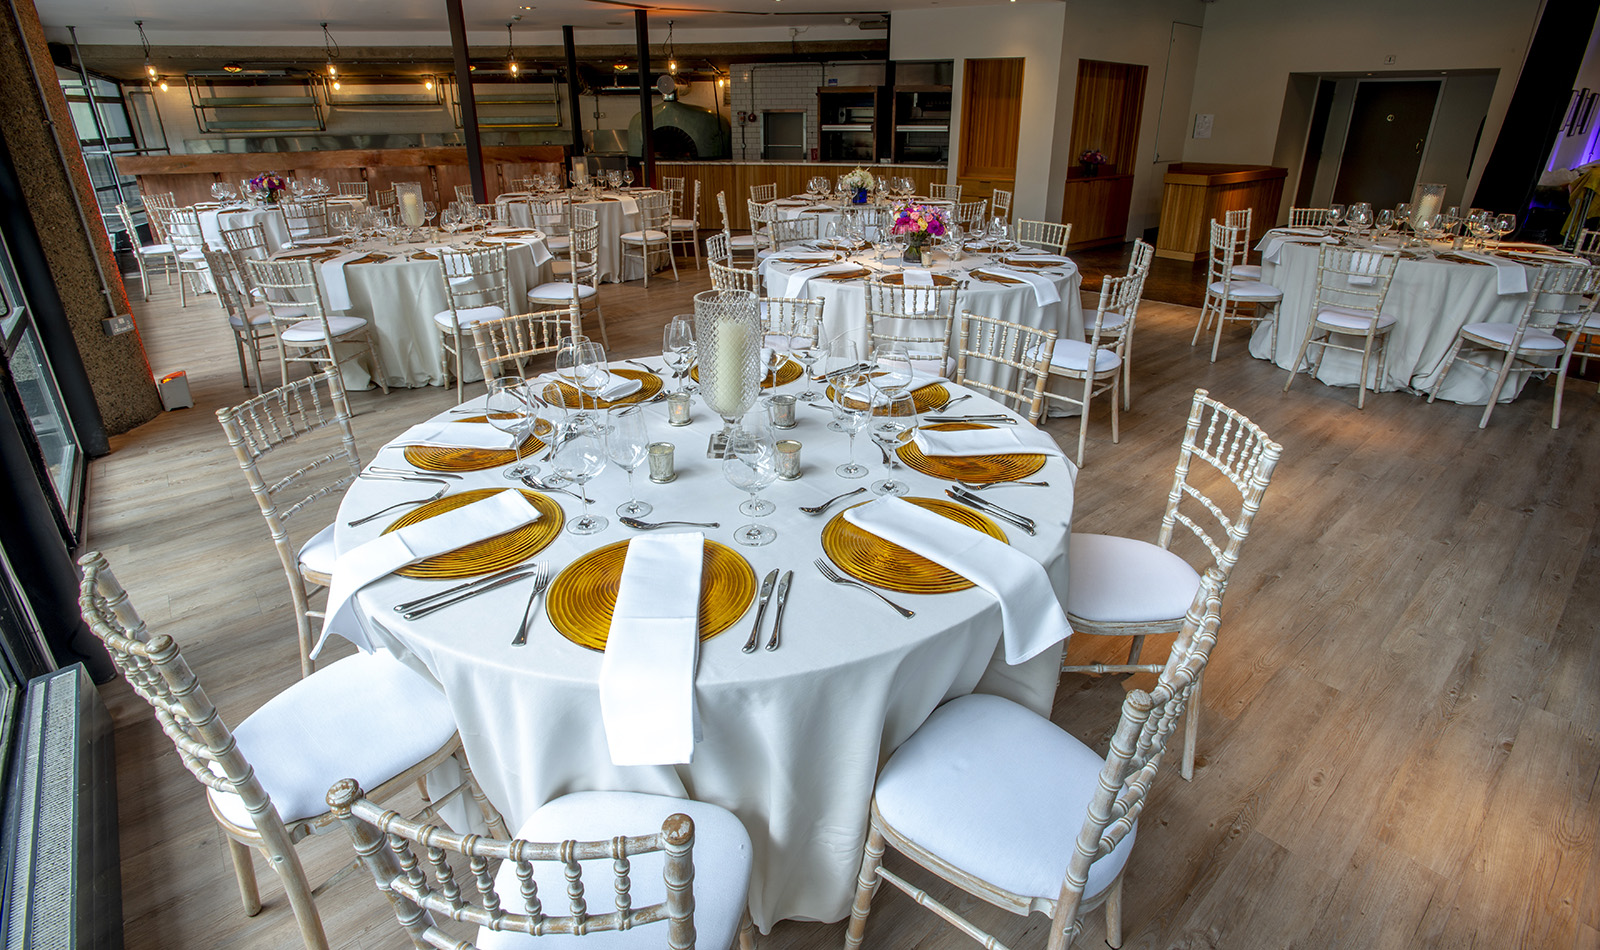 London Wall Bar & Kitchen set up for dinner, as part of the museum's venue hire offer